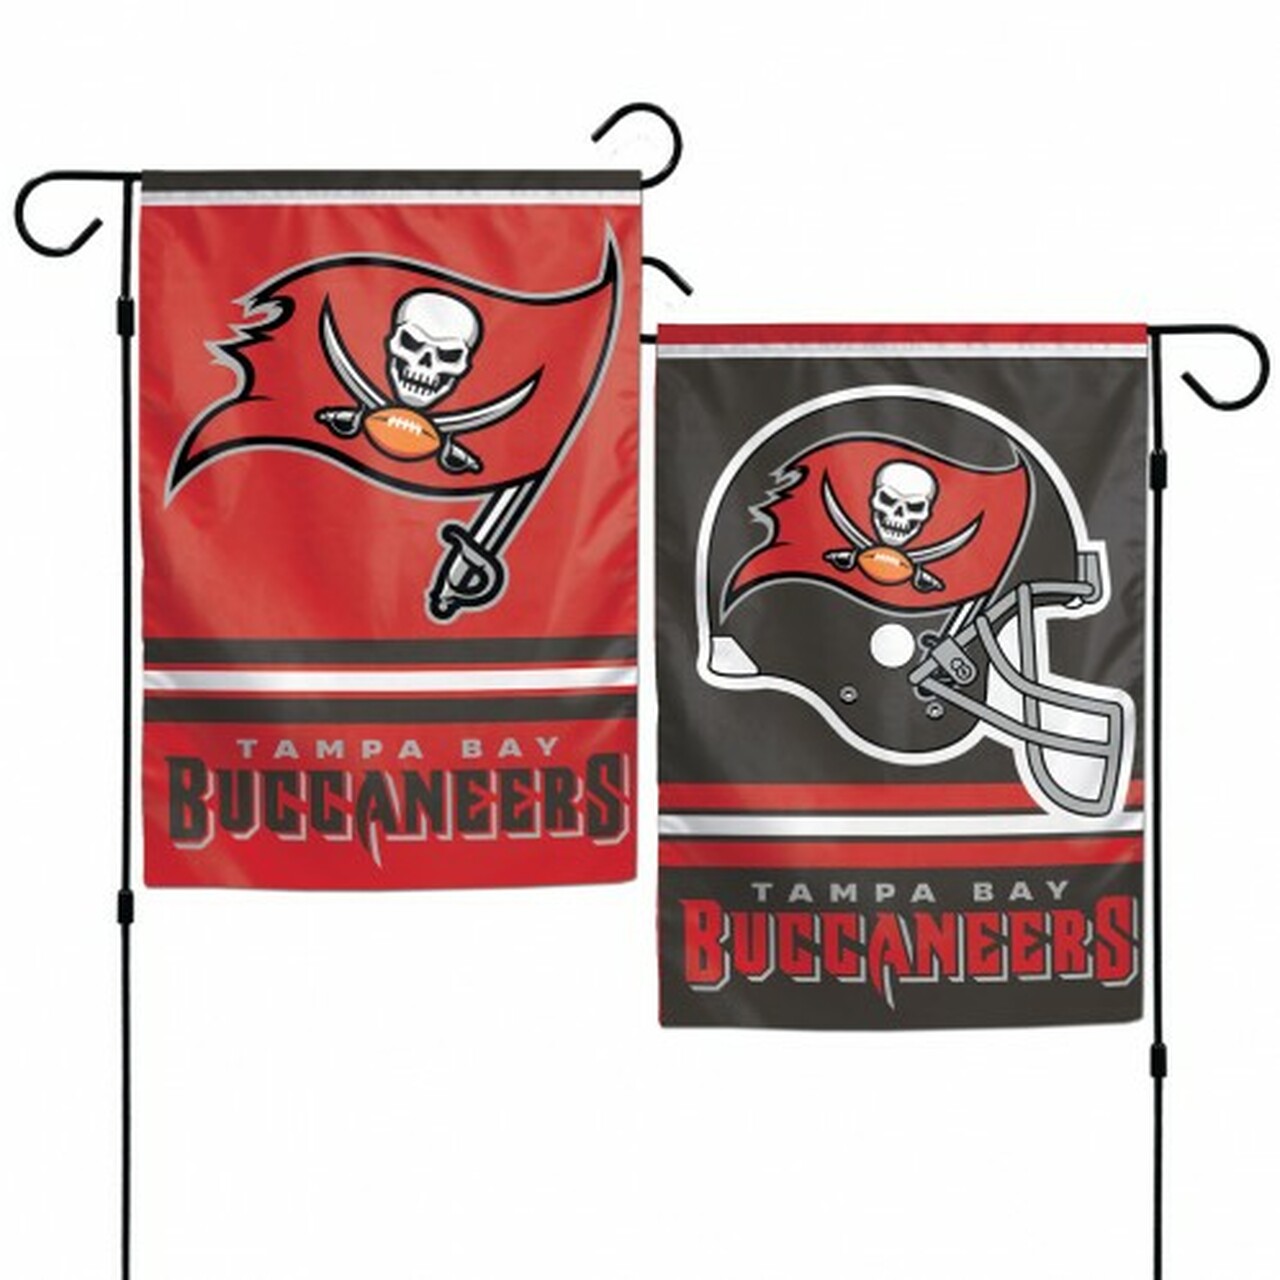 Tampa Bay Buccaneers 12" x 18" Garden Flag 2 Sided by Wincraft